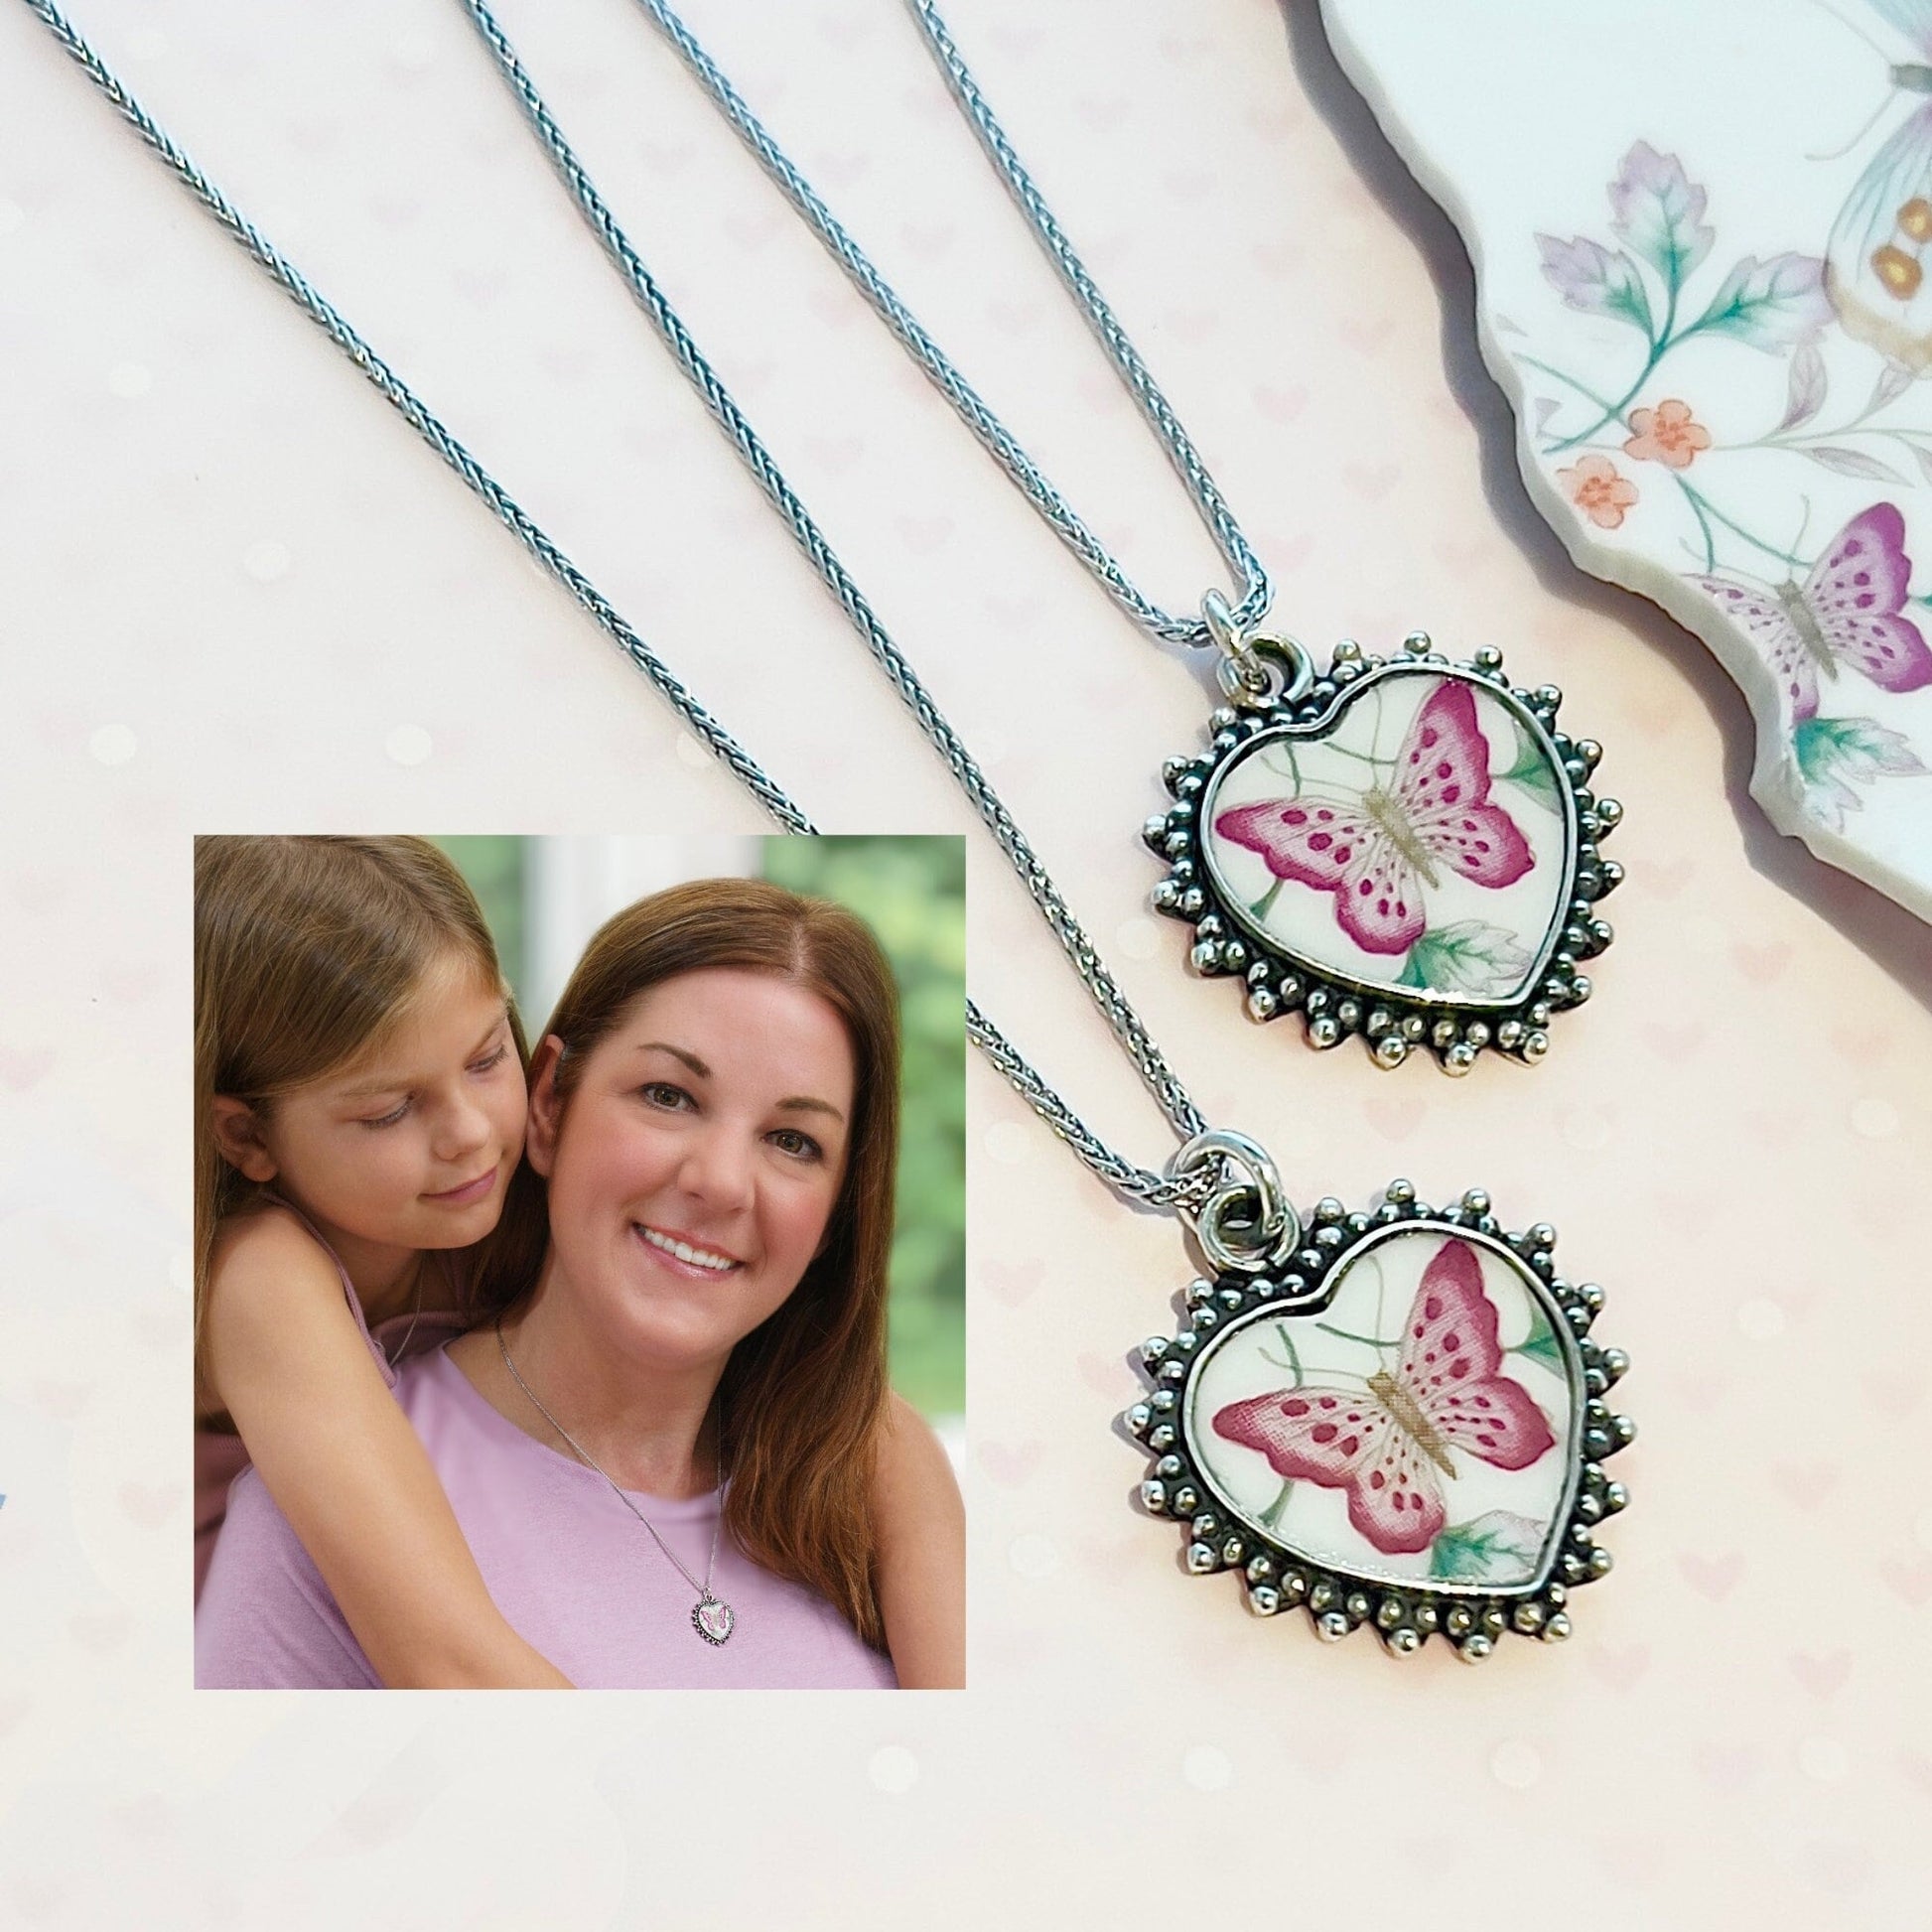 Mother Daughter Necklaces Set of 2, Matching Butterfly Necklaces, Broken China Jewelry Heart Pendant